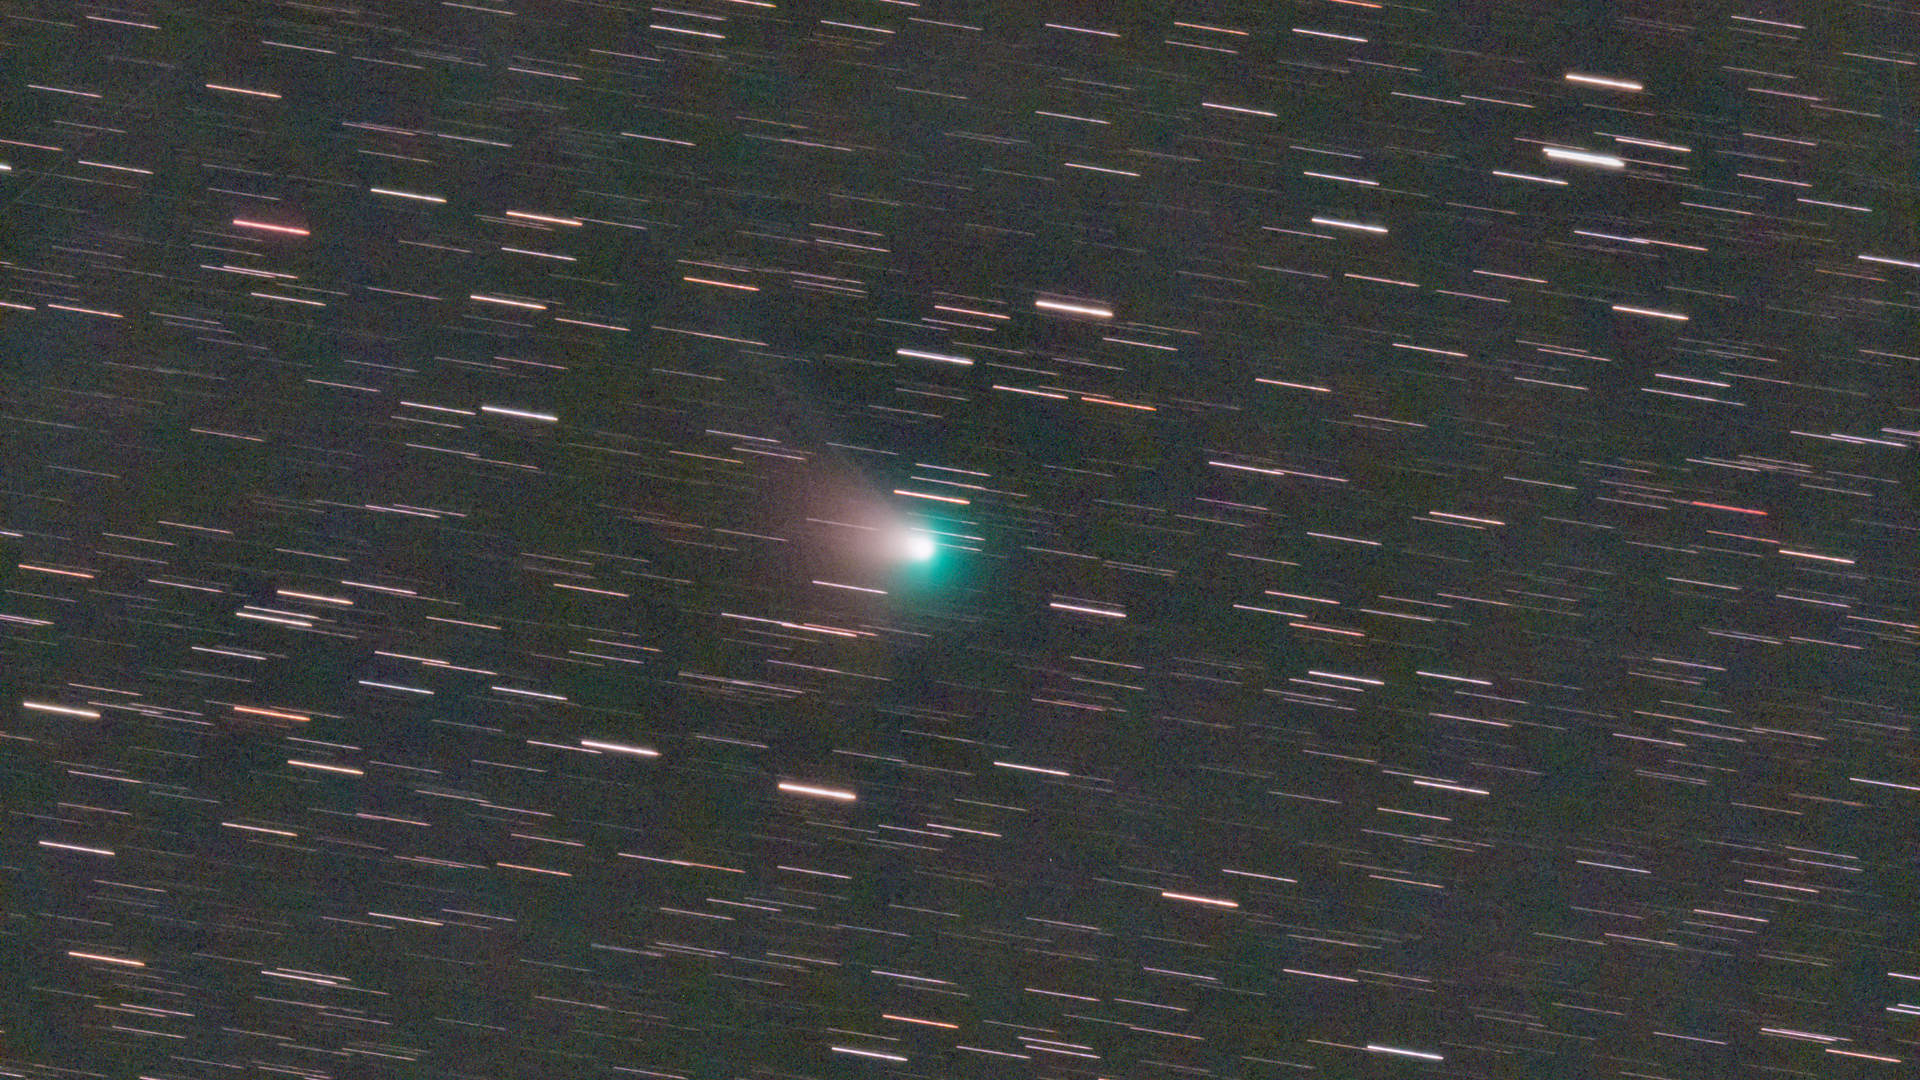 Photographer Darshna Ladva of London, UK, captured this image of the comet C/2022 E3 (ZFT) on Jan. 11, 2022 in the predawn sky.